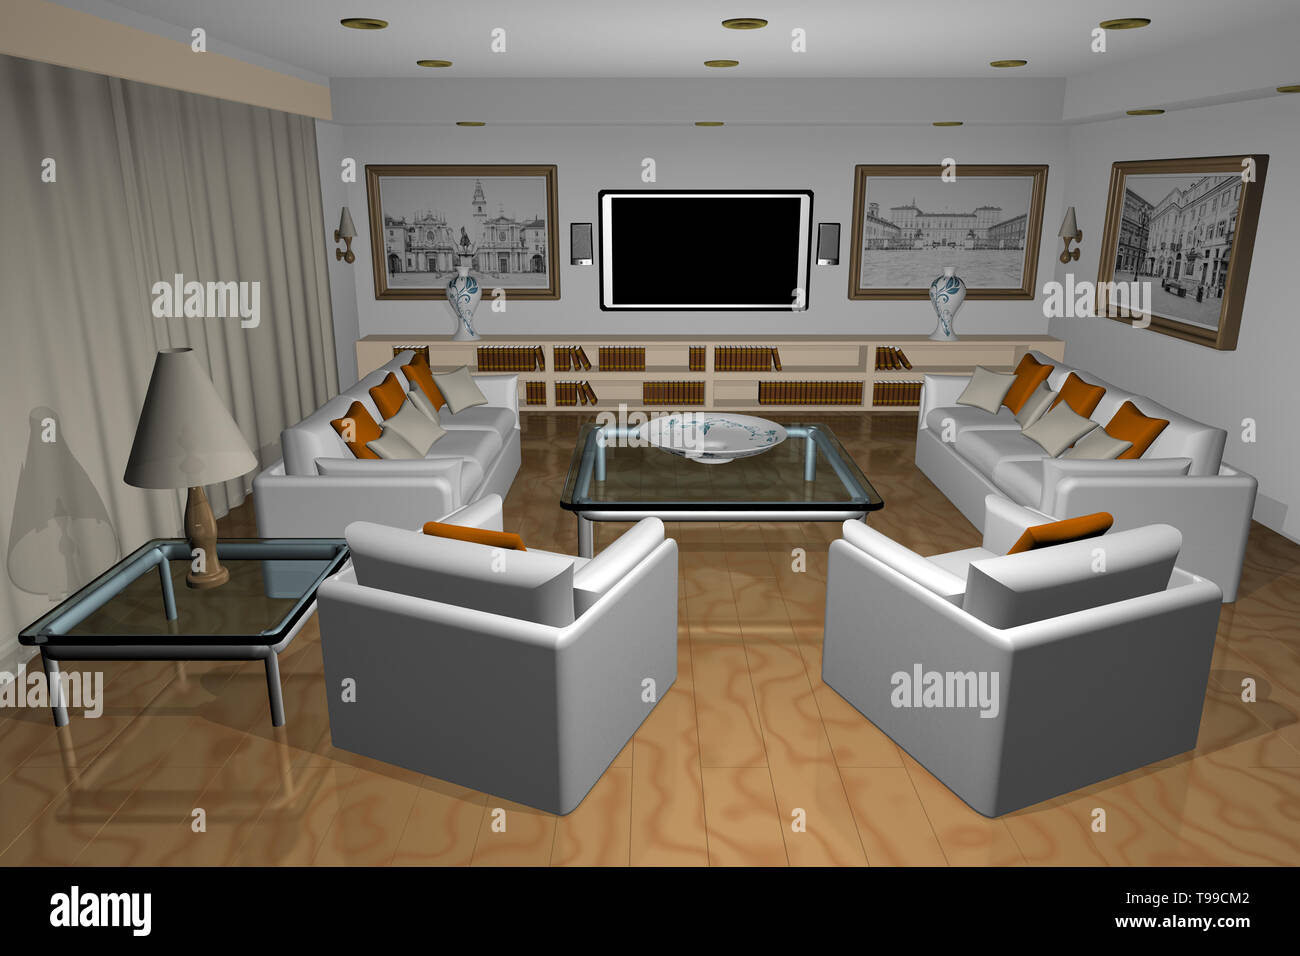 3d Illustration House Inside The Living Room With Tv Armchairs